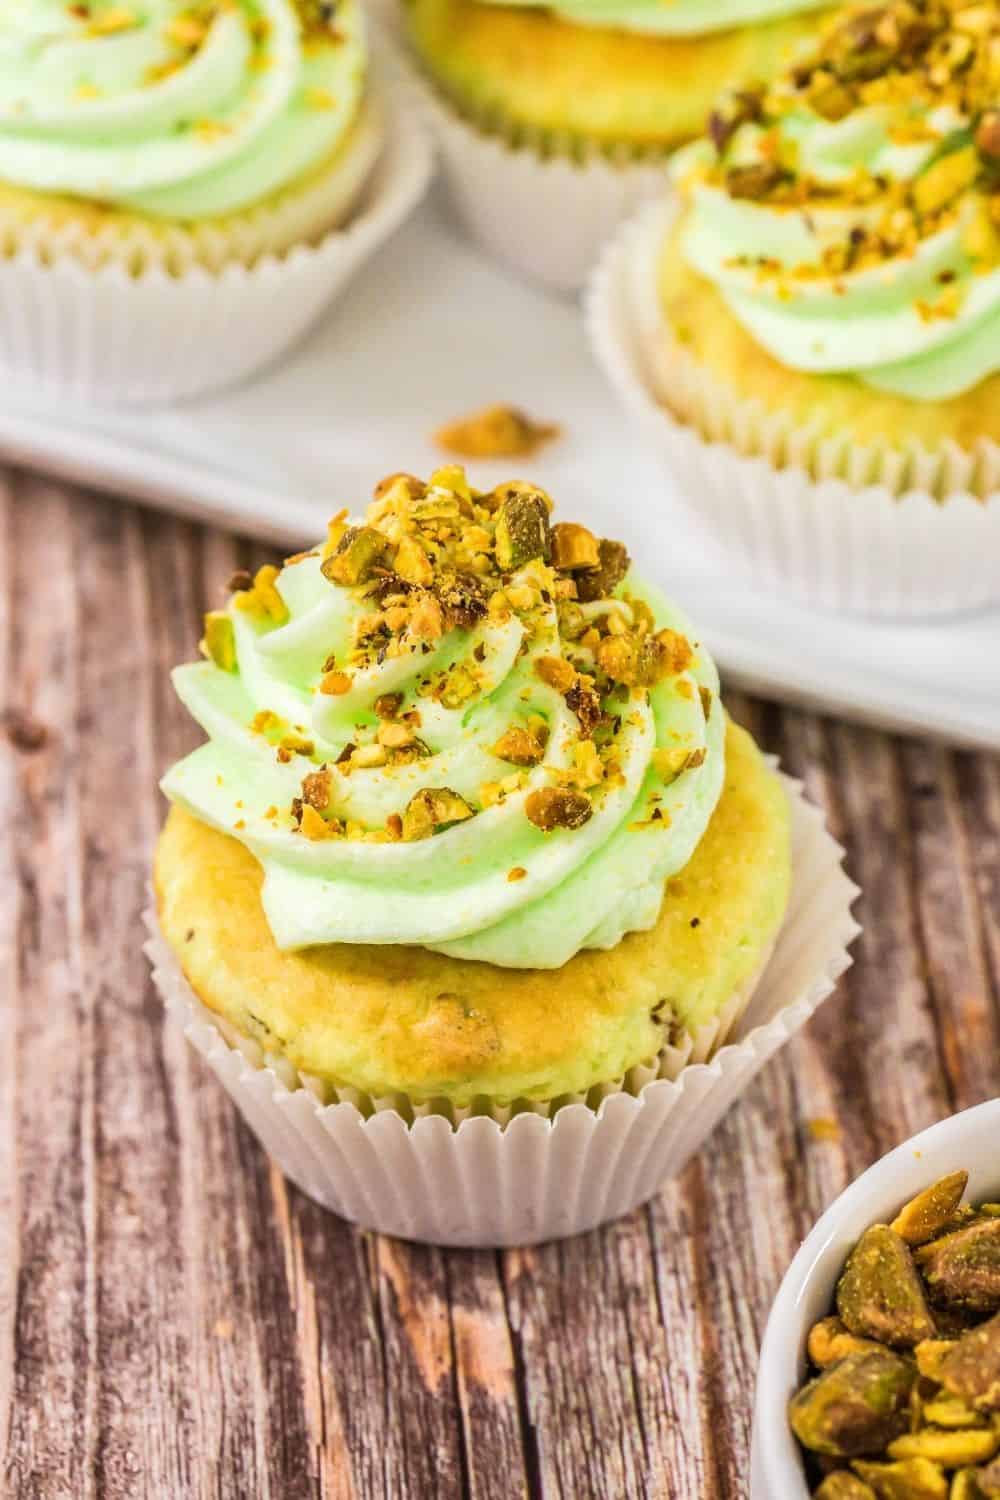 pale green pistachio cupcake made from cake mix, topped with pistachio pudding buttercream and garnished with chopped nuts.